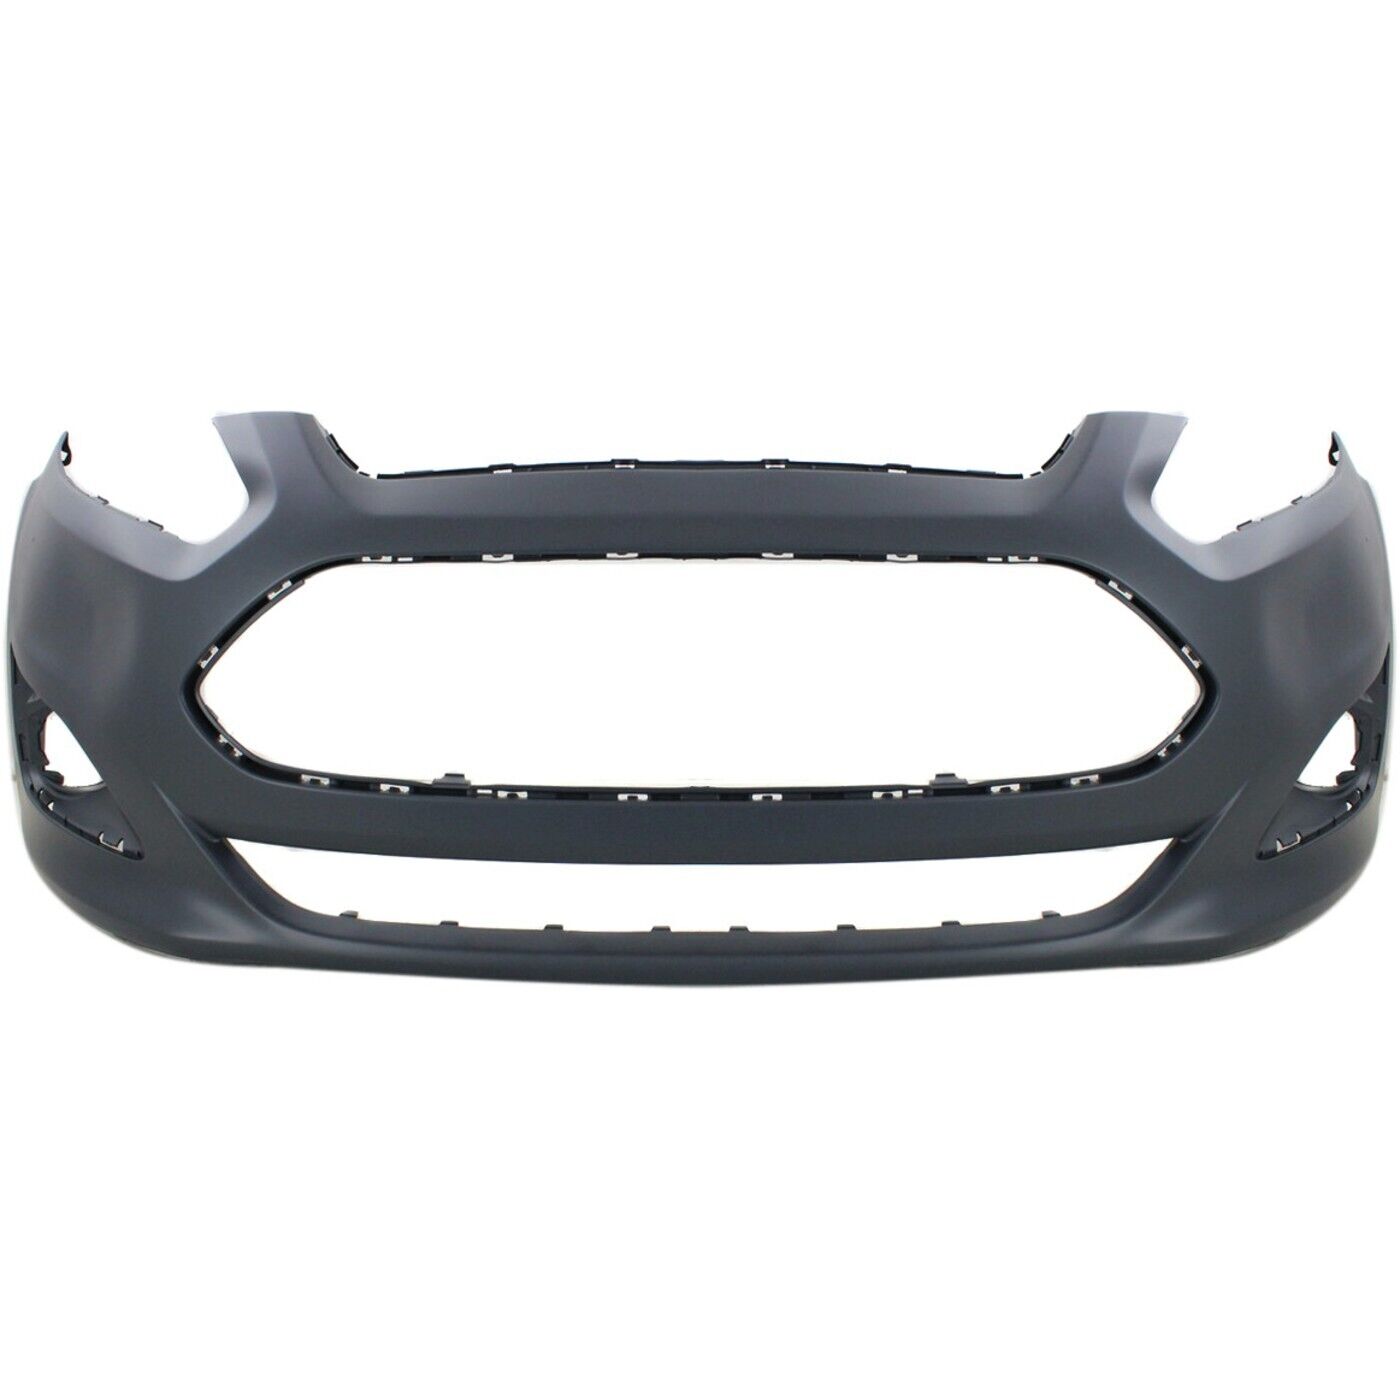 Front Bumper Cover For 2013-2016 Ford C-Max w/ fog lamp holes Primed